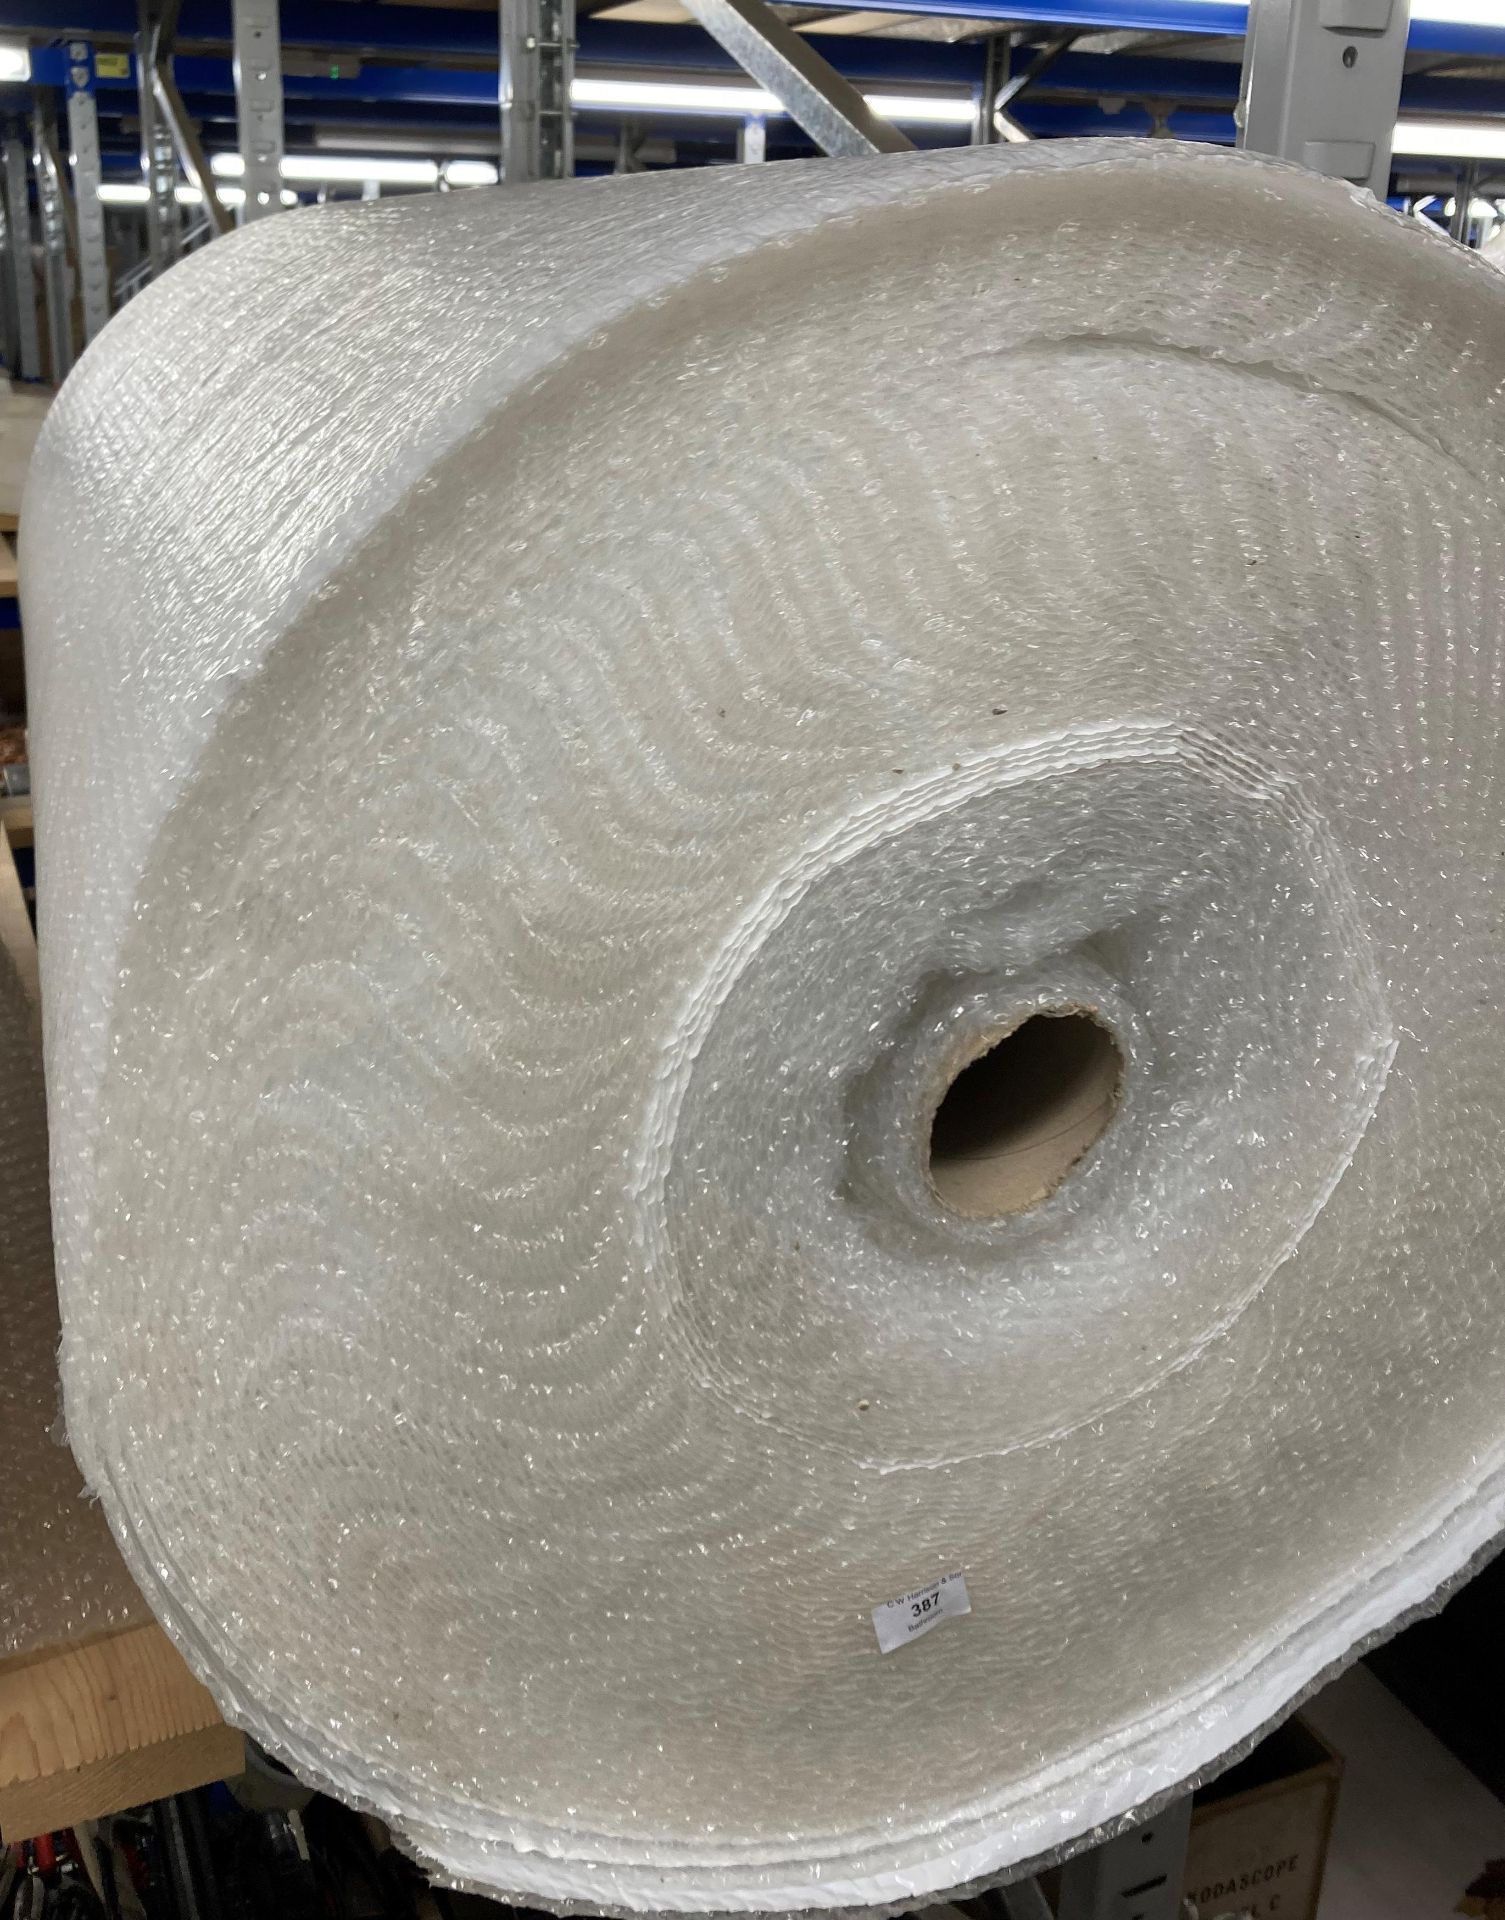 Large roll of bubble wrap (saleroom location: TOP T01)